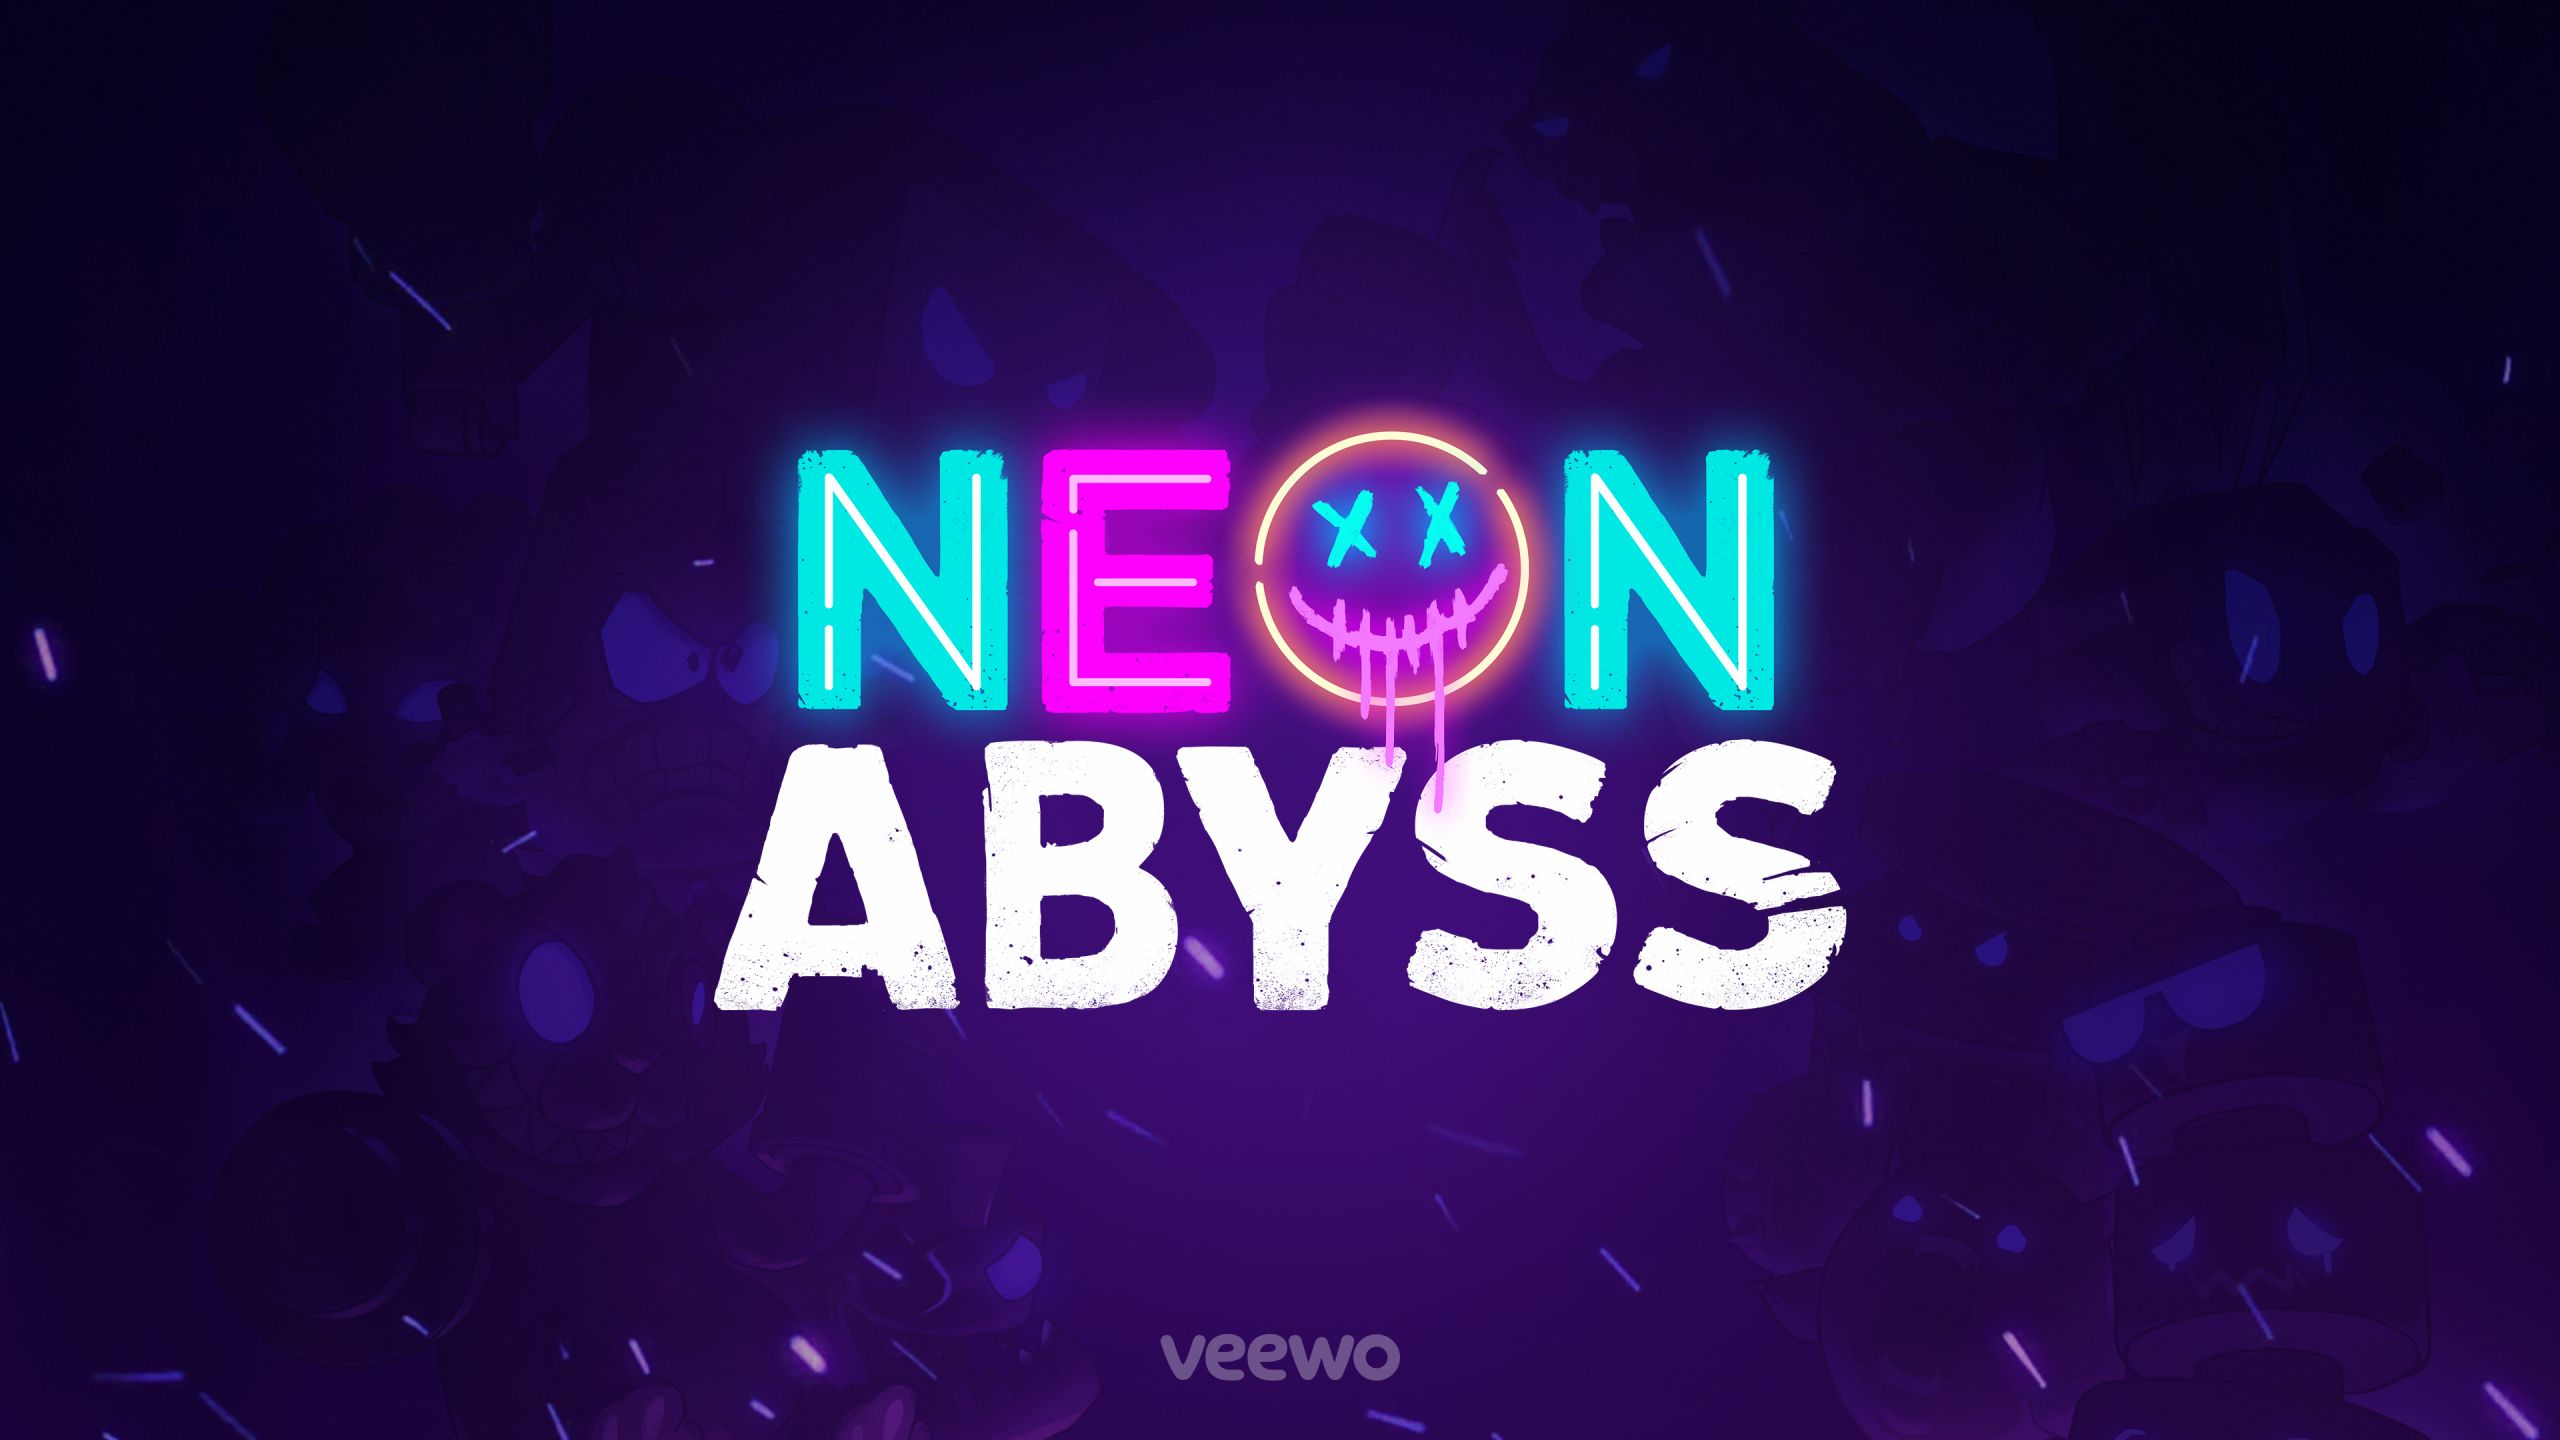 Neon Abyss: free desktop wallpaper and background image